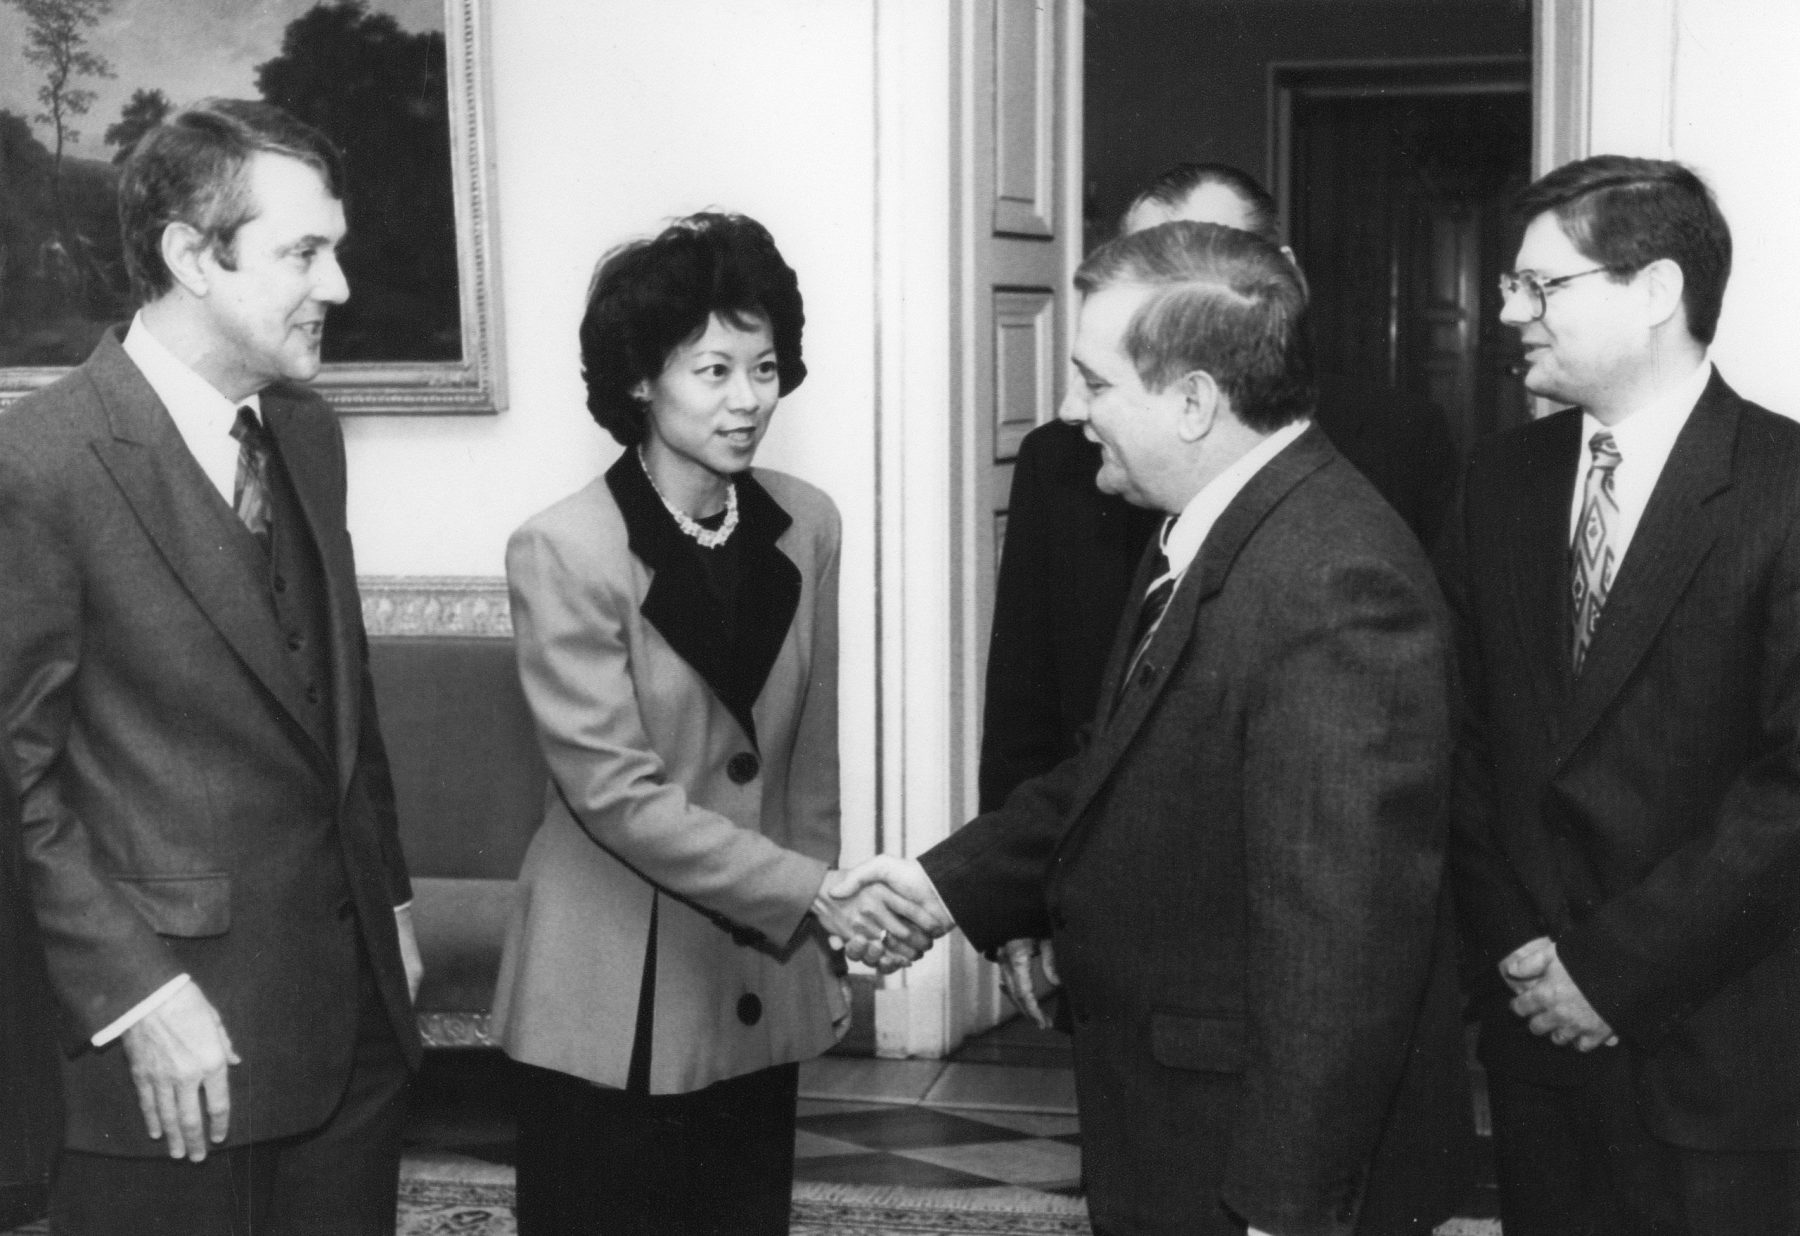 Peace Corps Director Elaine Chao meeting with Lech Walesa, President of Poland in Warsaw.